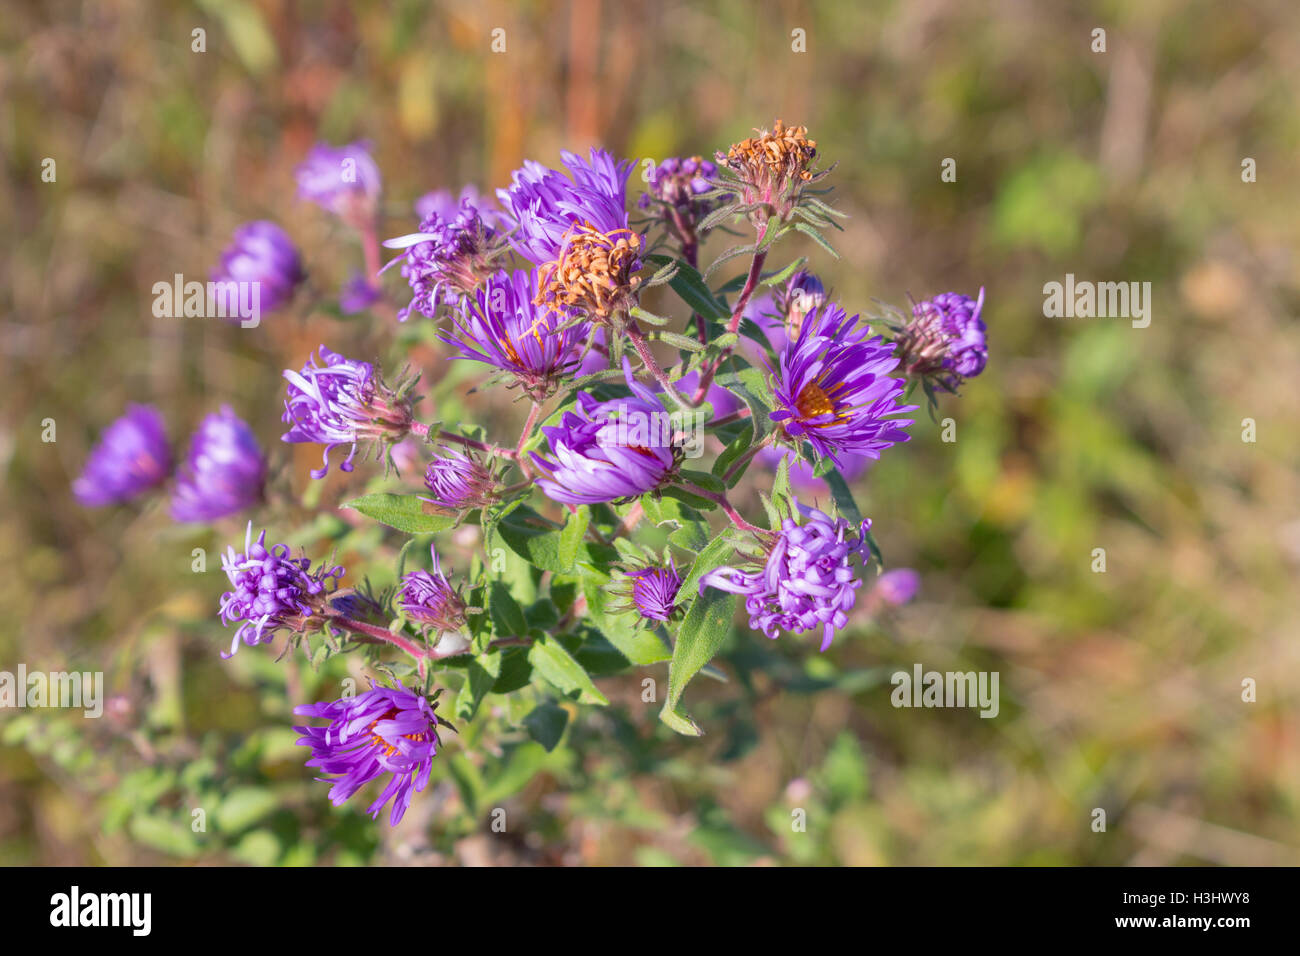 Wild purple New England asters (Symphyotrichum novae-angliae) blooming in a field, Indiana, United States Stock Photo